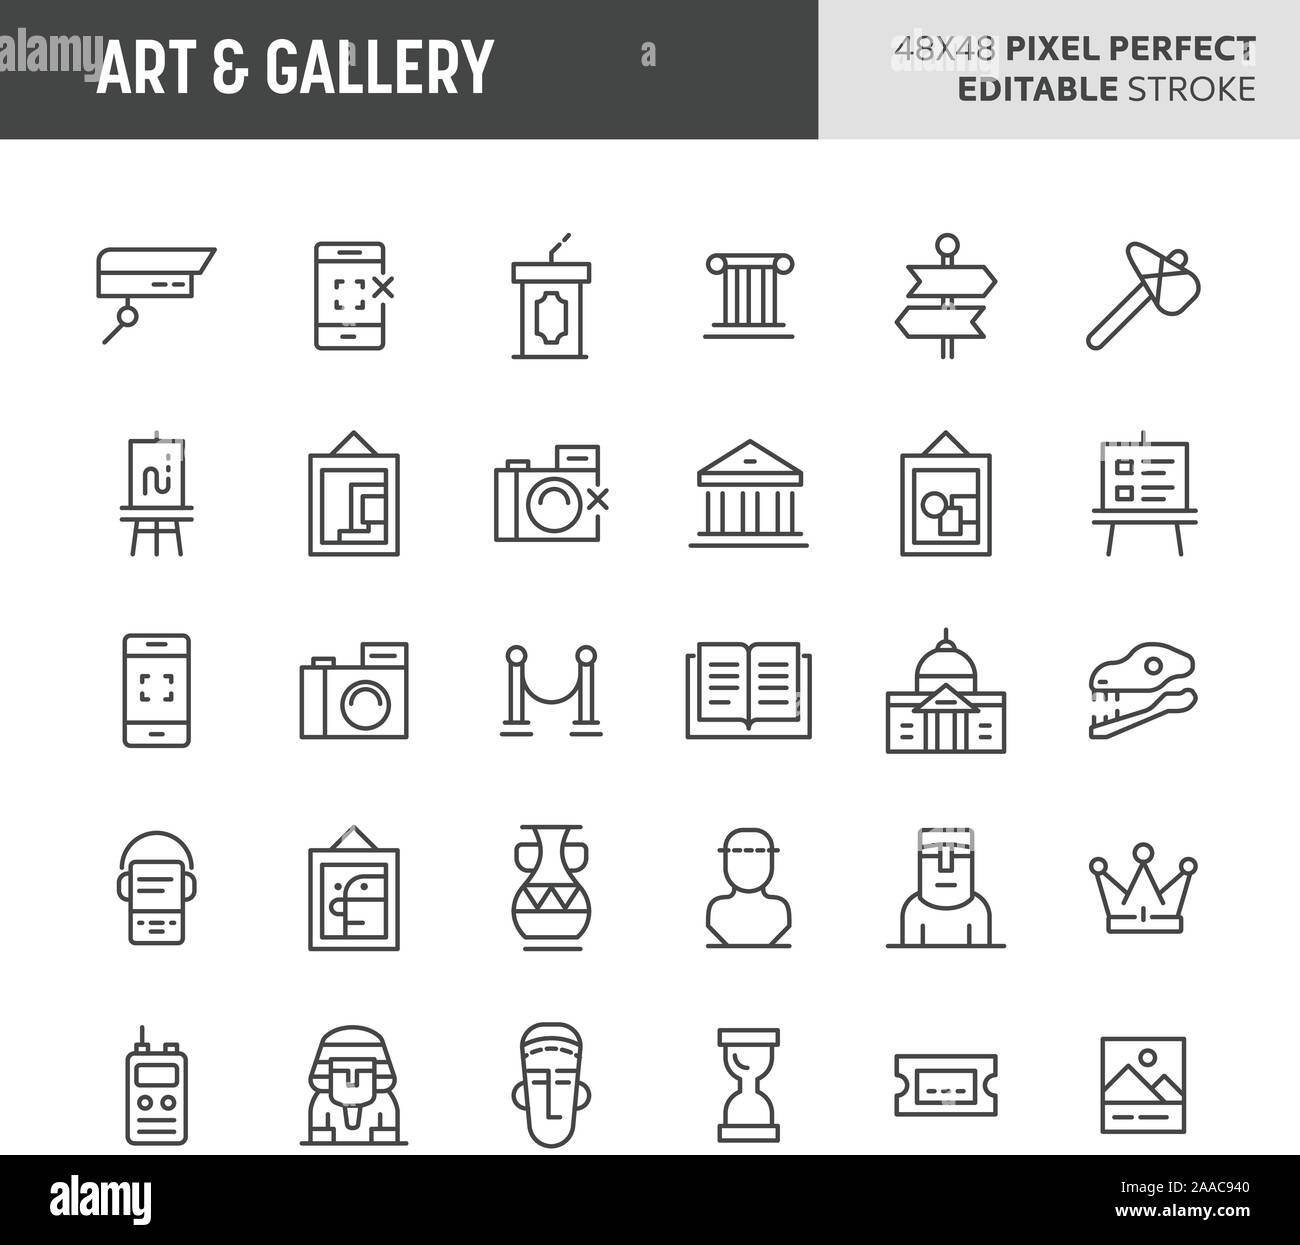 30 thin line icons associated with art and gallery with symbols such as historical object, artworks and museum related objects are included in this se Stock Vector